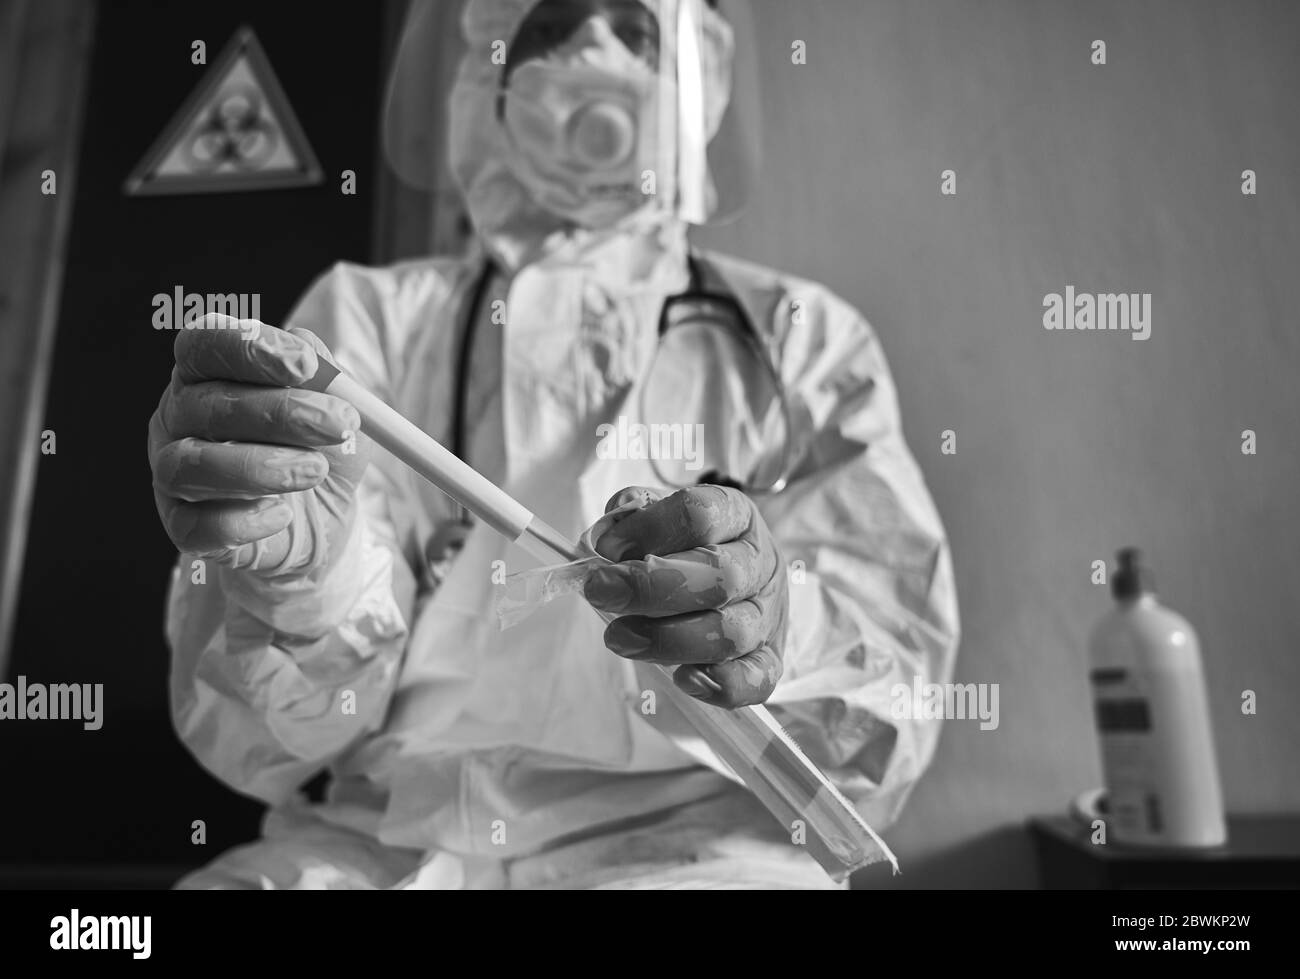 Medical worker holding COVID-19 swab collection kit, wearing white PPE protective suit, face mask, gloves, test tube for taking OP NP patient specimen sample, biohazard sign on background Stock Photo